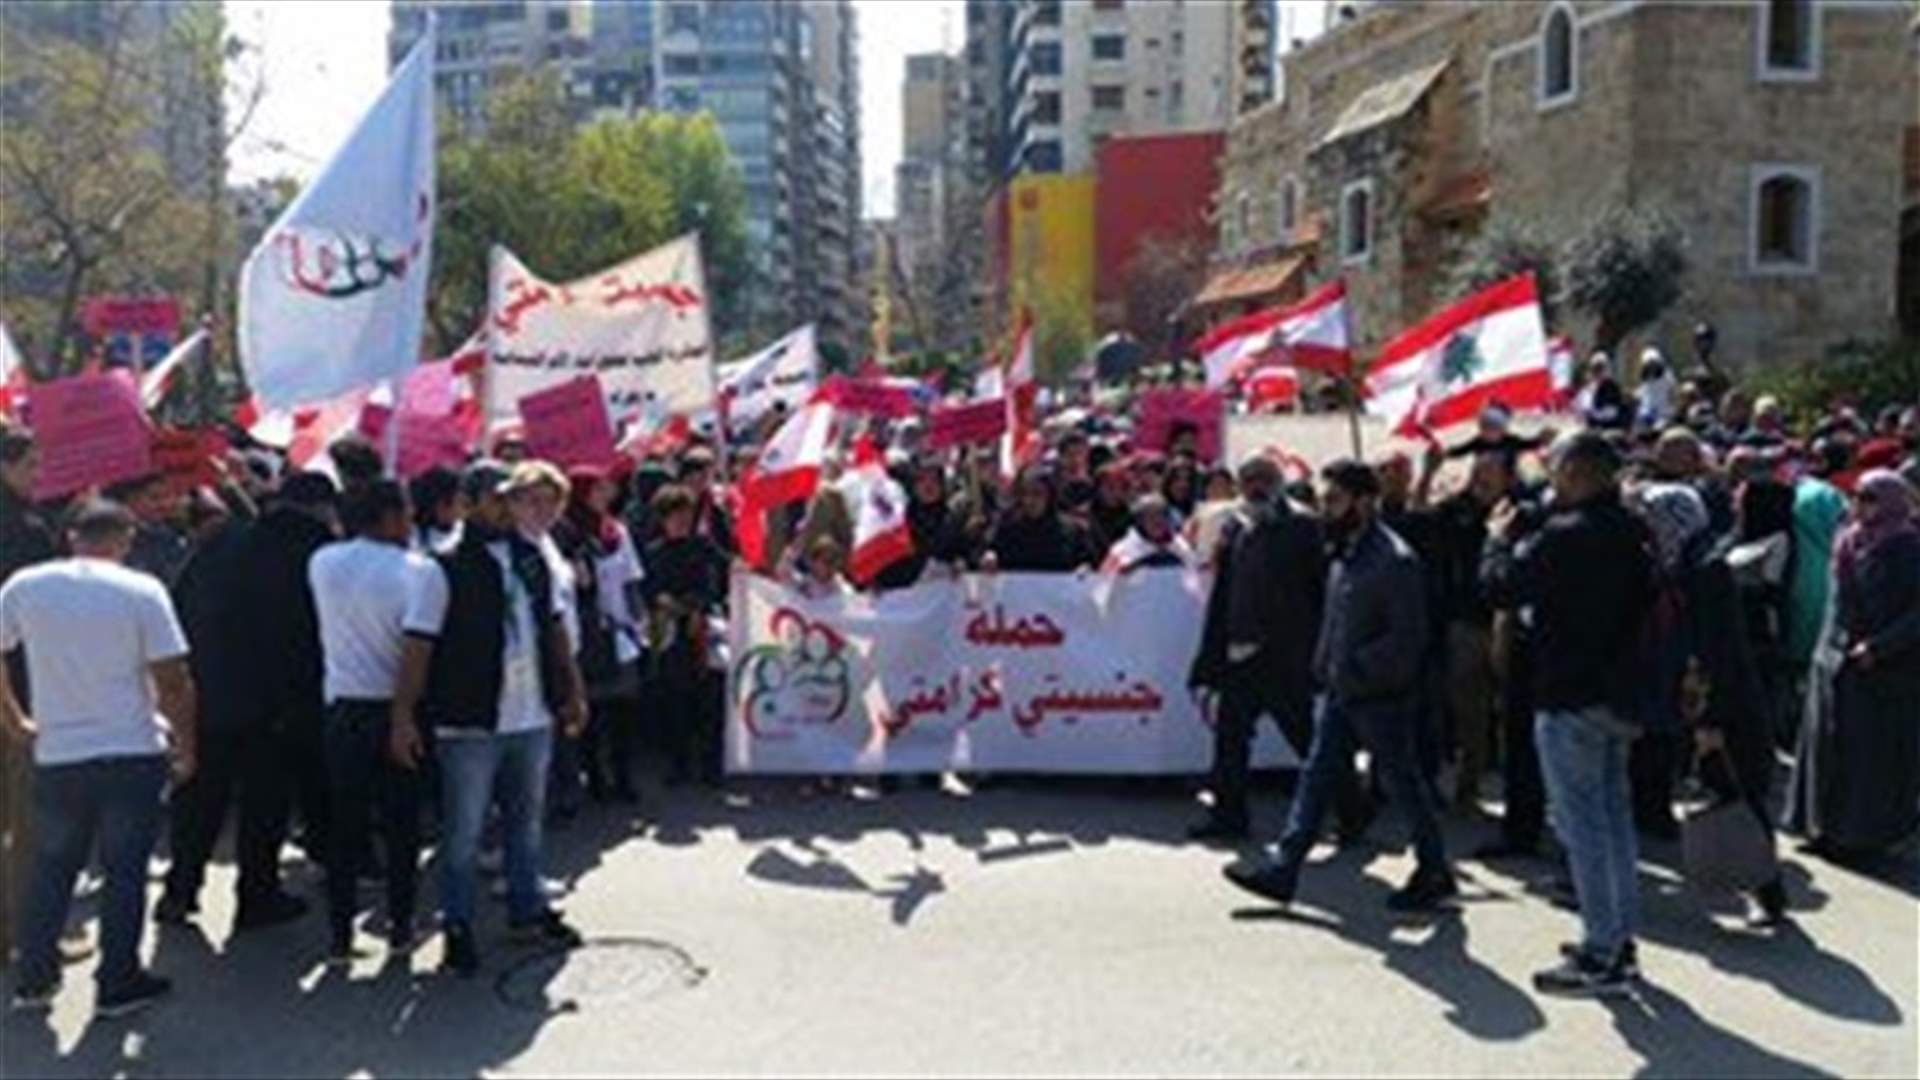 Hundreds protest in Beirut over nationality law